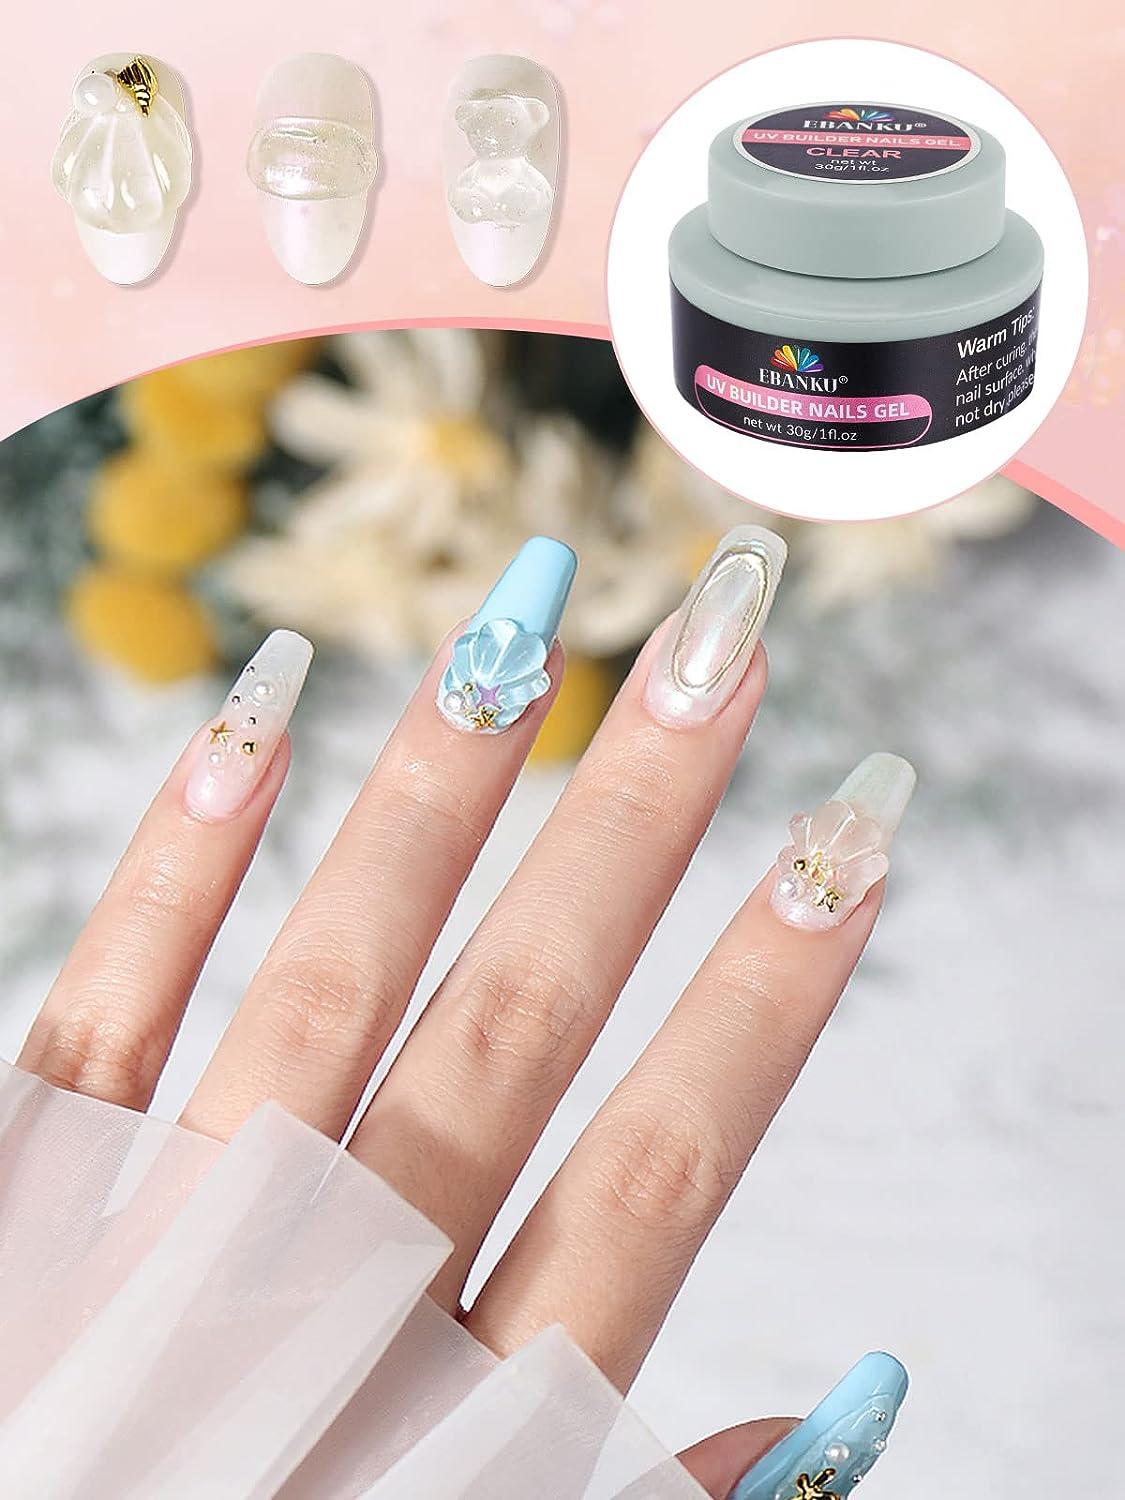 Amazon.com : FZANEST Builder Gel For Nails Set,2pcs * 15ml Rubber Base Gel  Nail Polish,Jelly Sheer Beige Natrual Nude Gel Polish Thick Texture Good To  Strengthen Thin Flimsy Nail : Beauty &